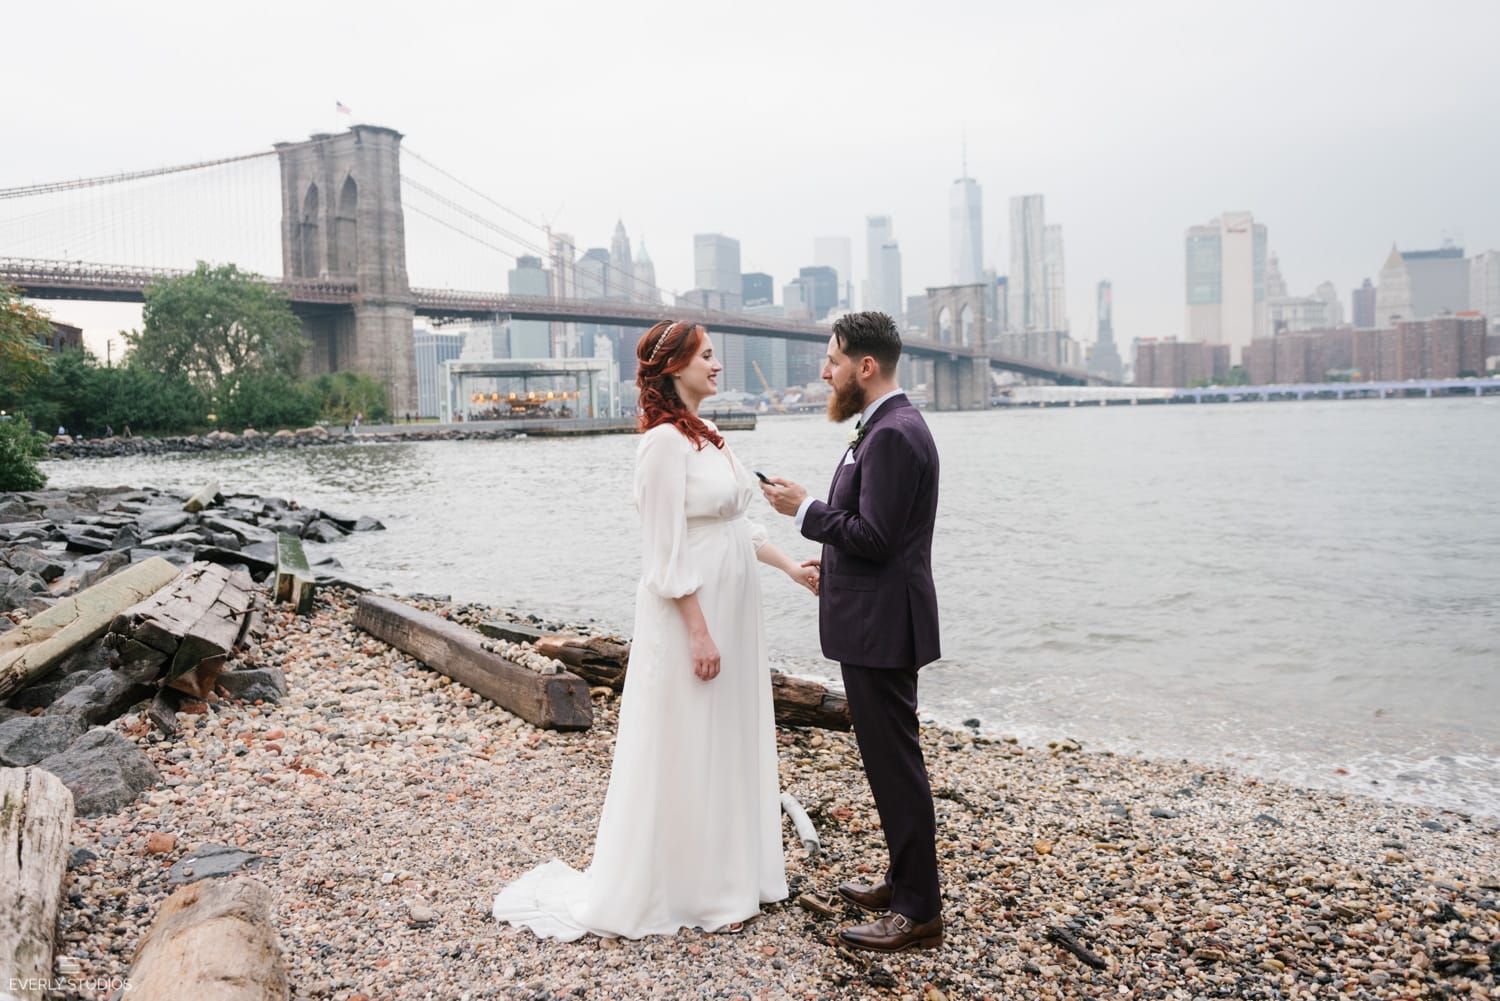 Brooklyn Bridge Park elopement, best NYC elopement locations, places to elope in nyc